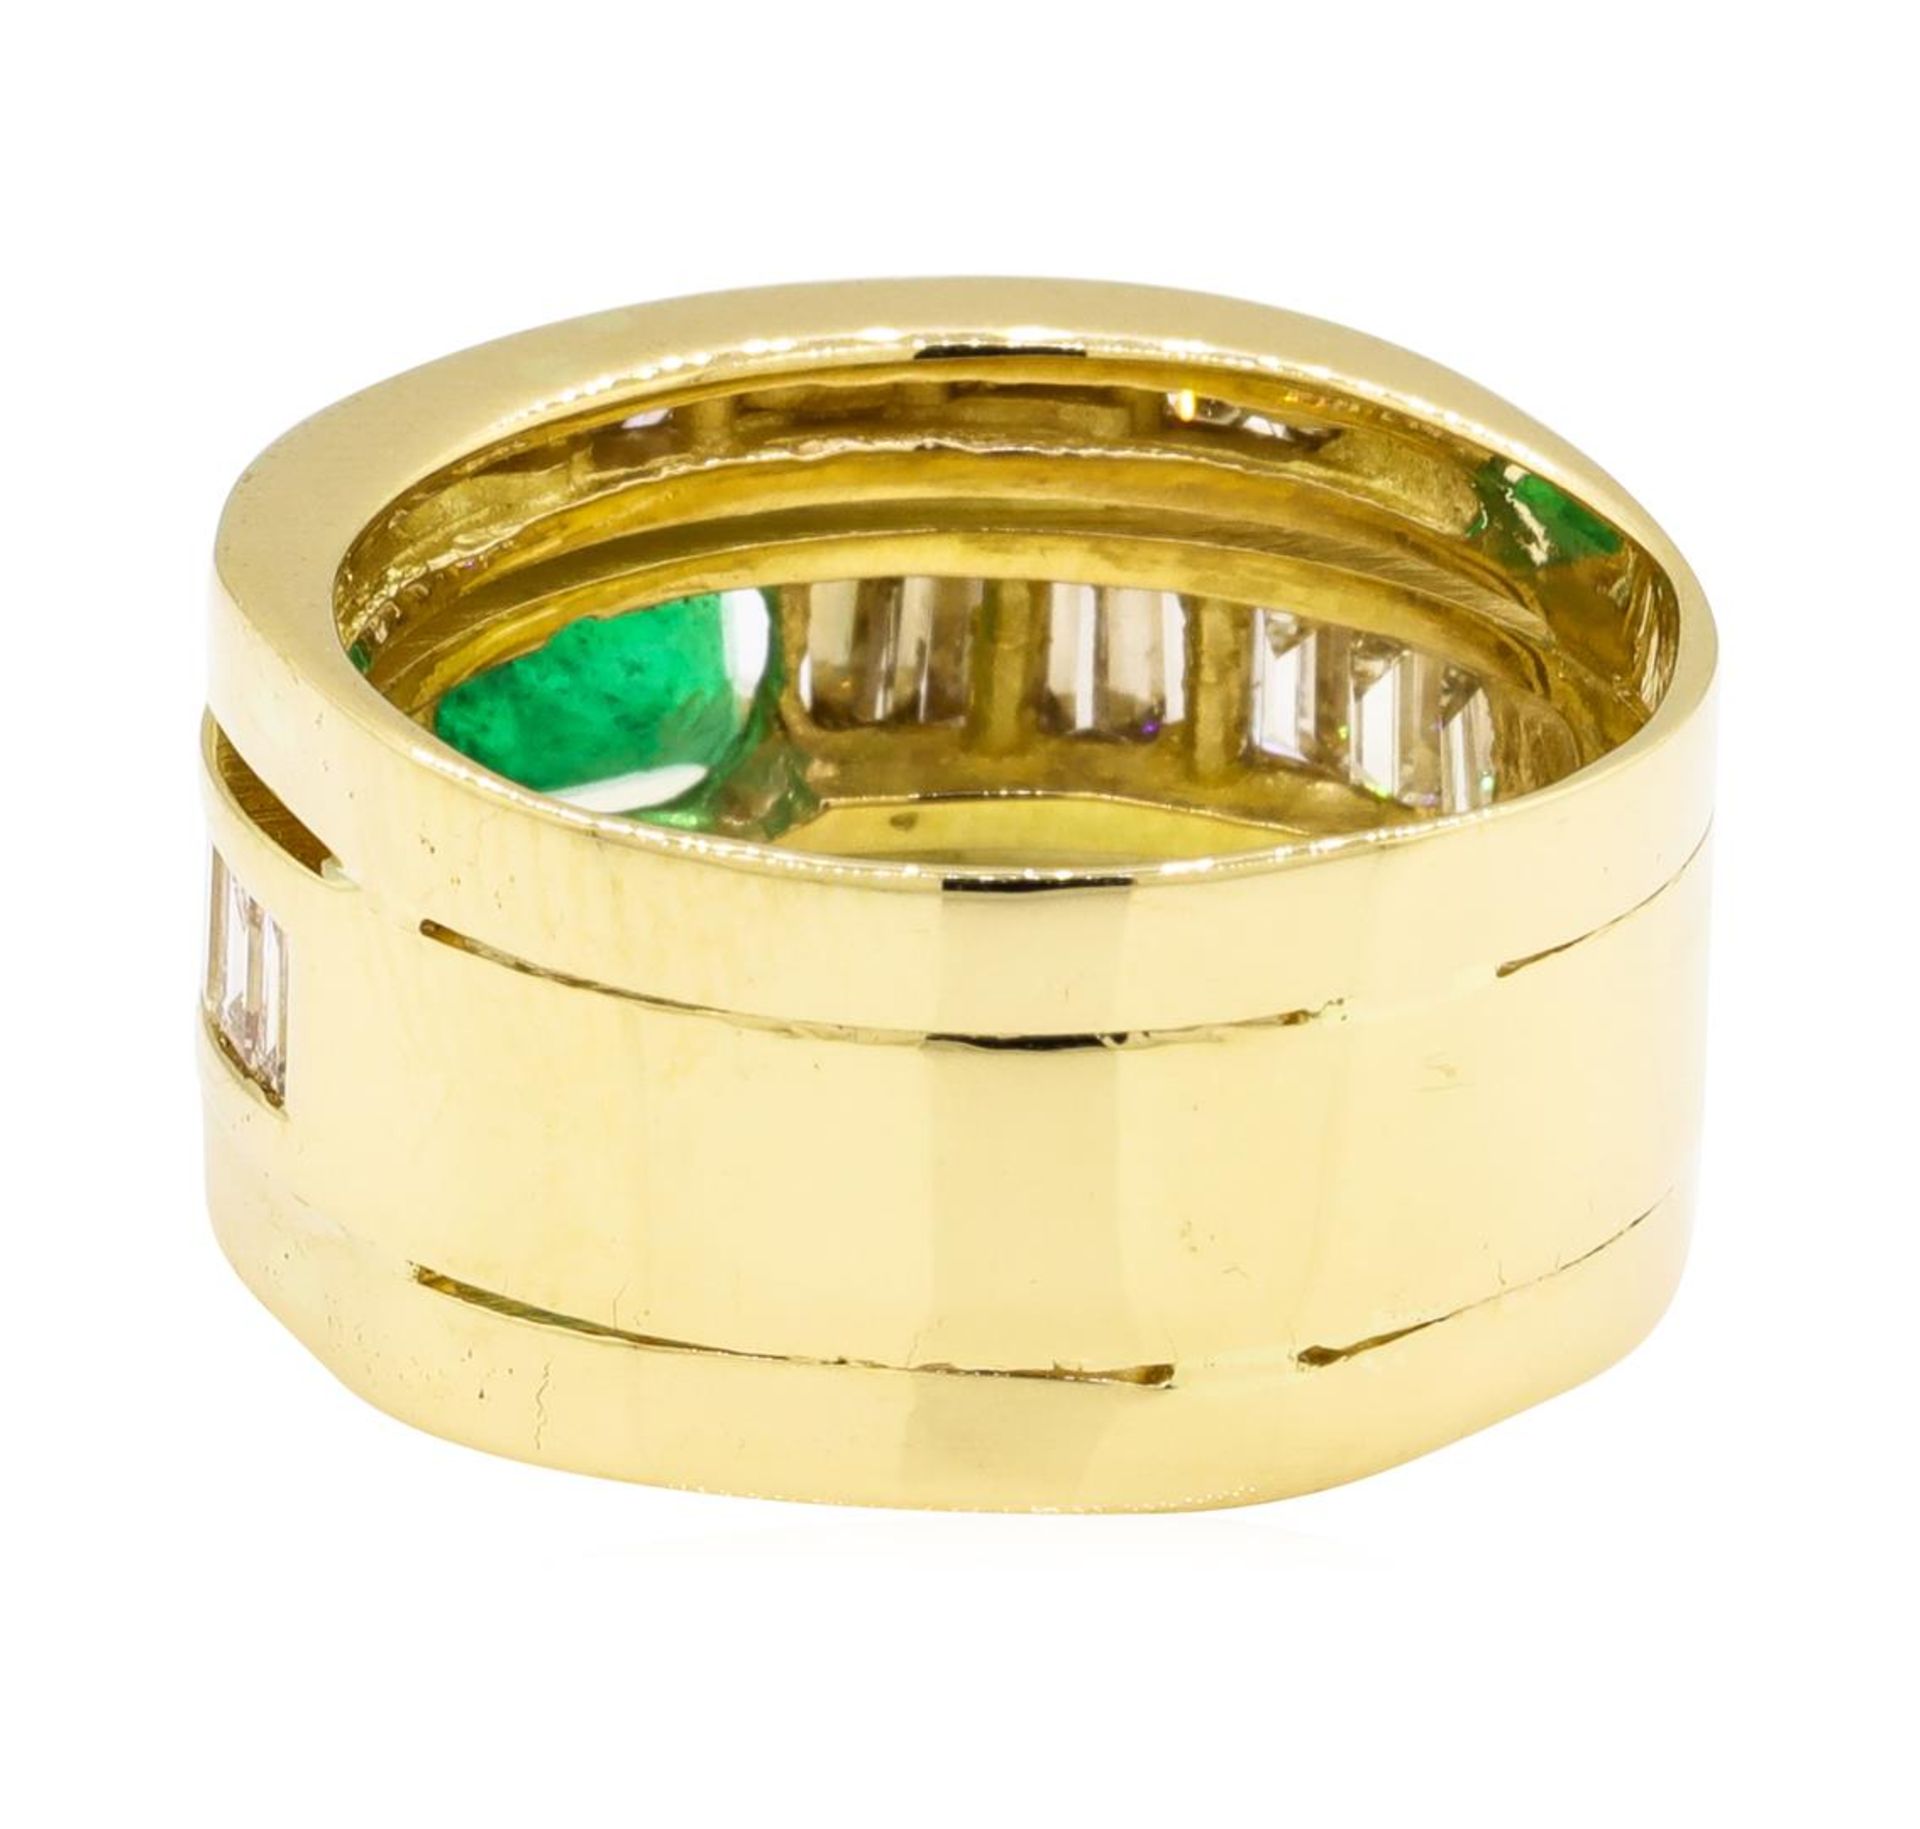 0.90 ct ct Emerald and Diamond Ring - 18KT Yellow Gold - Image 3 of 5